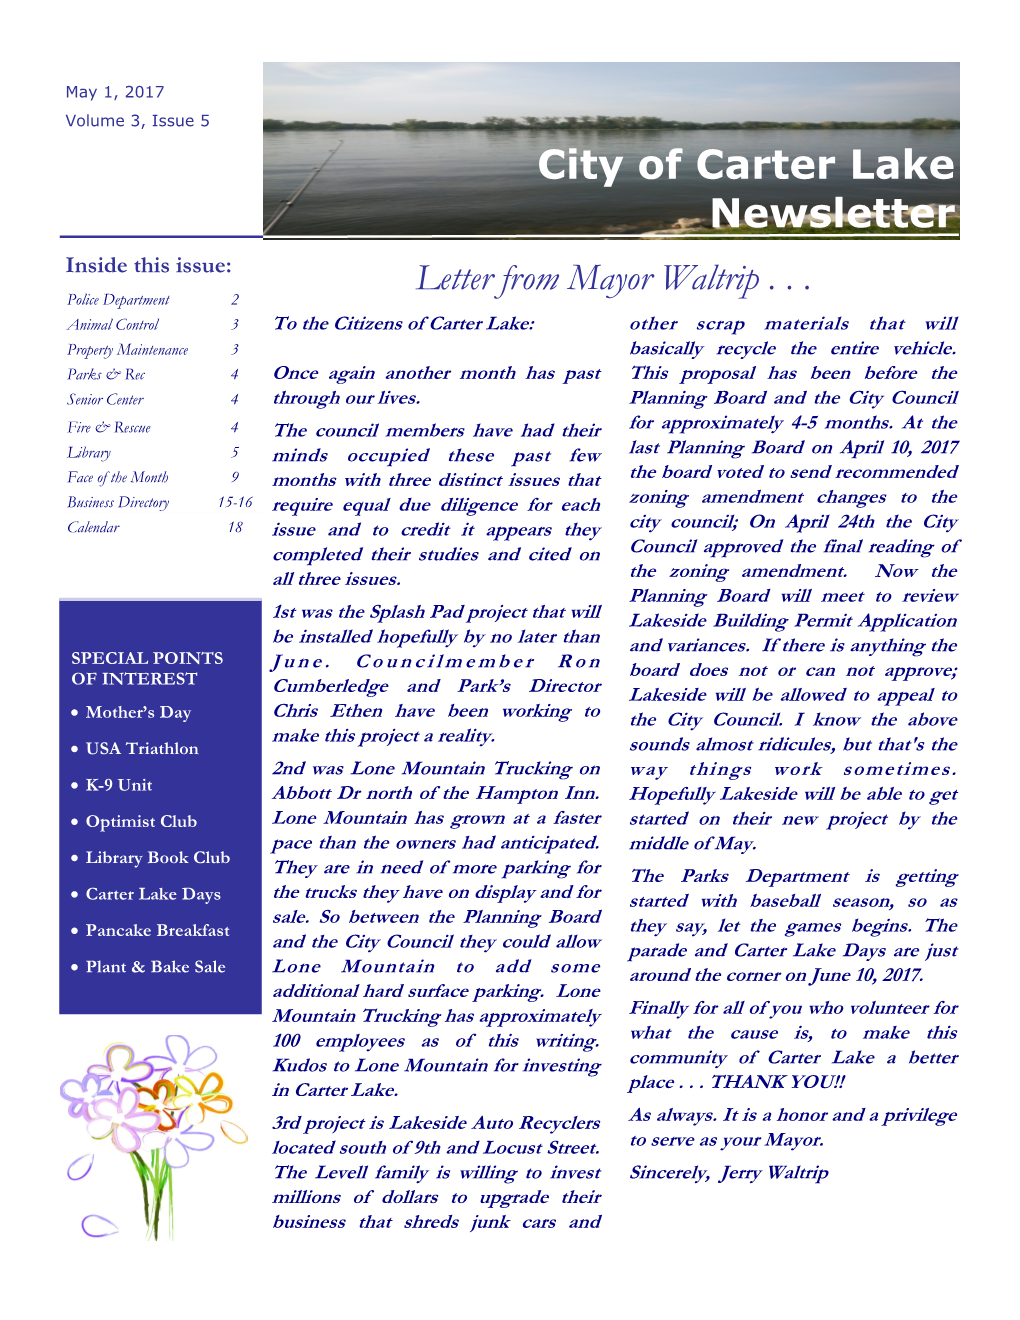 City of Carter Lake Newsletter Inside This Issue: Letter from Mayor Waltrip